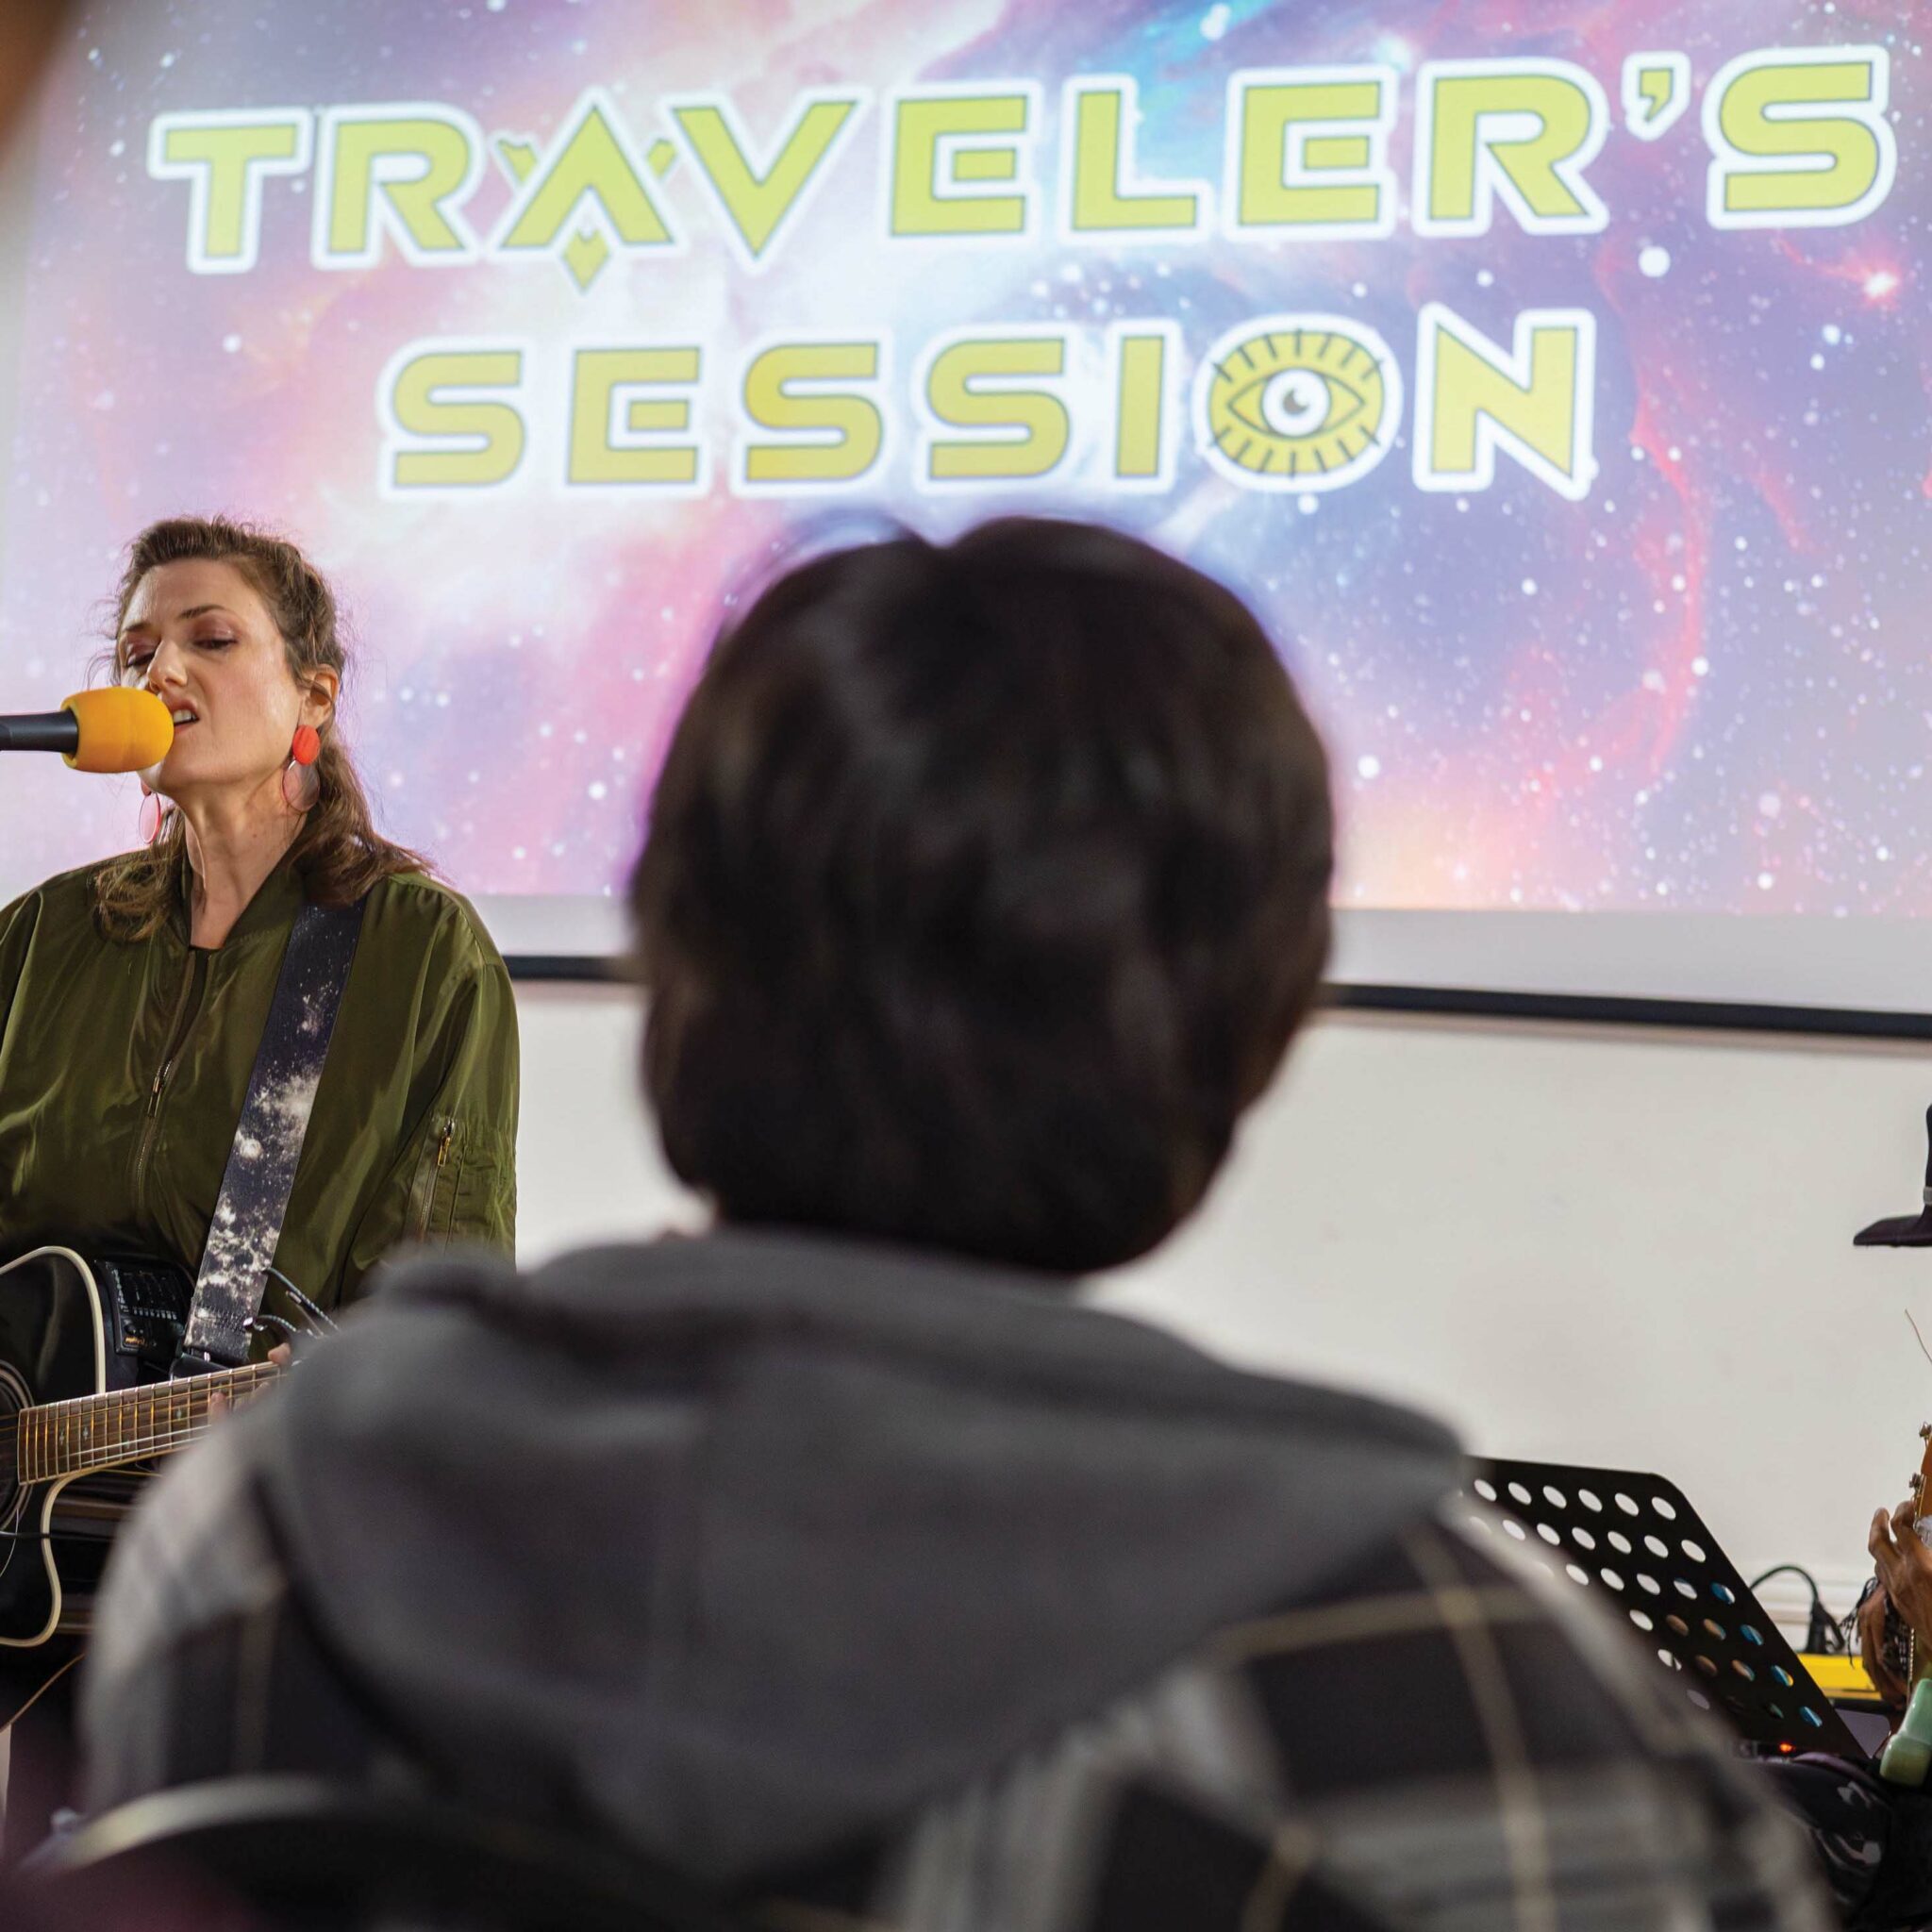 Sunset Masonic Lodge No. 369 hosts an open mic event called the Traveler's Sessions